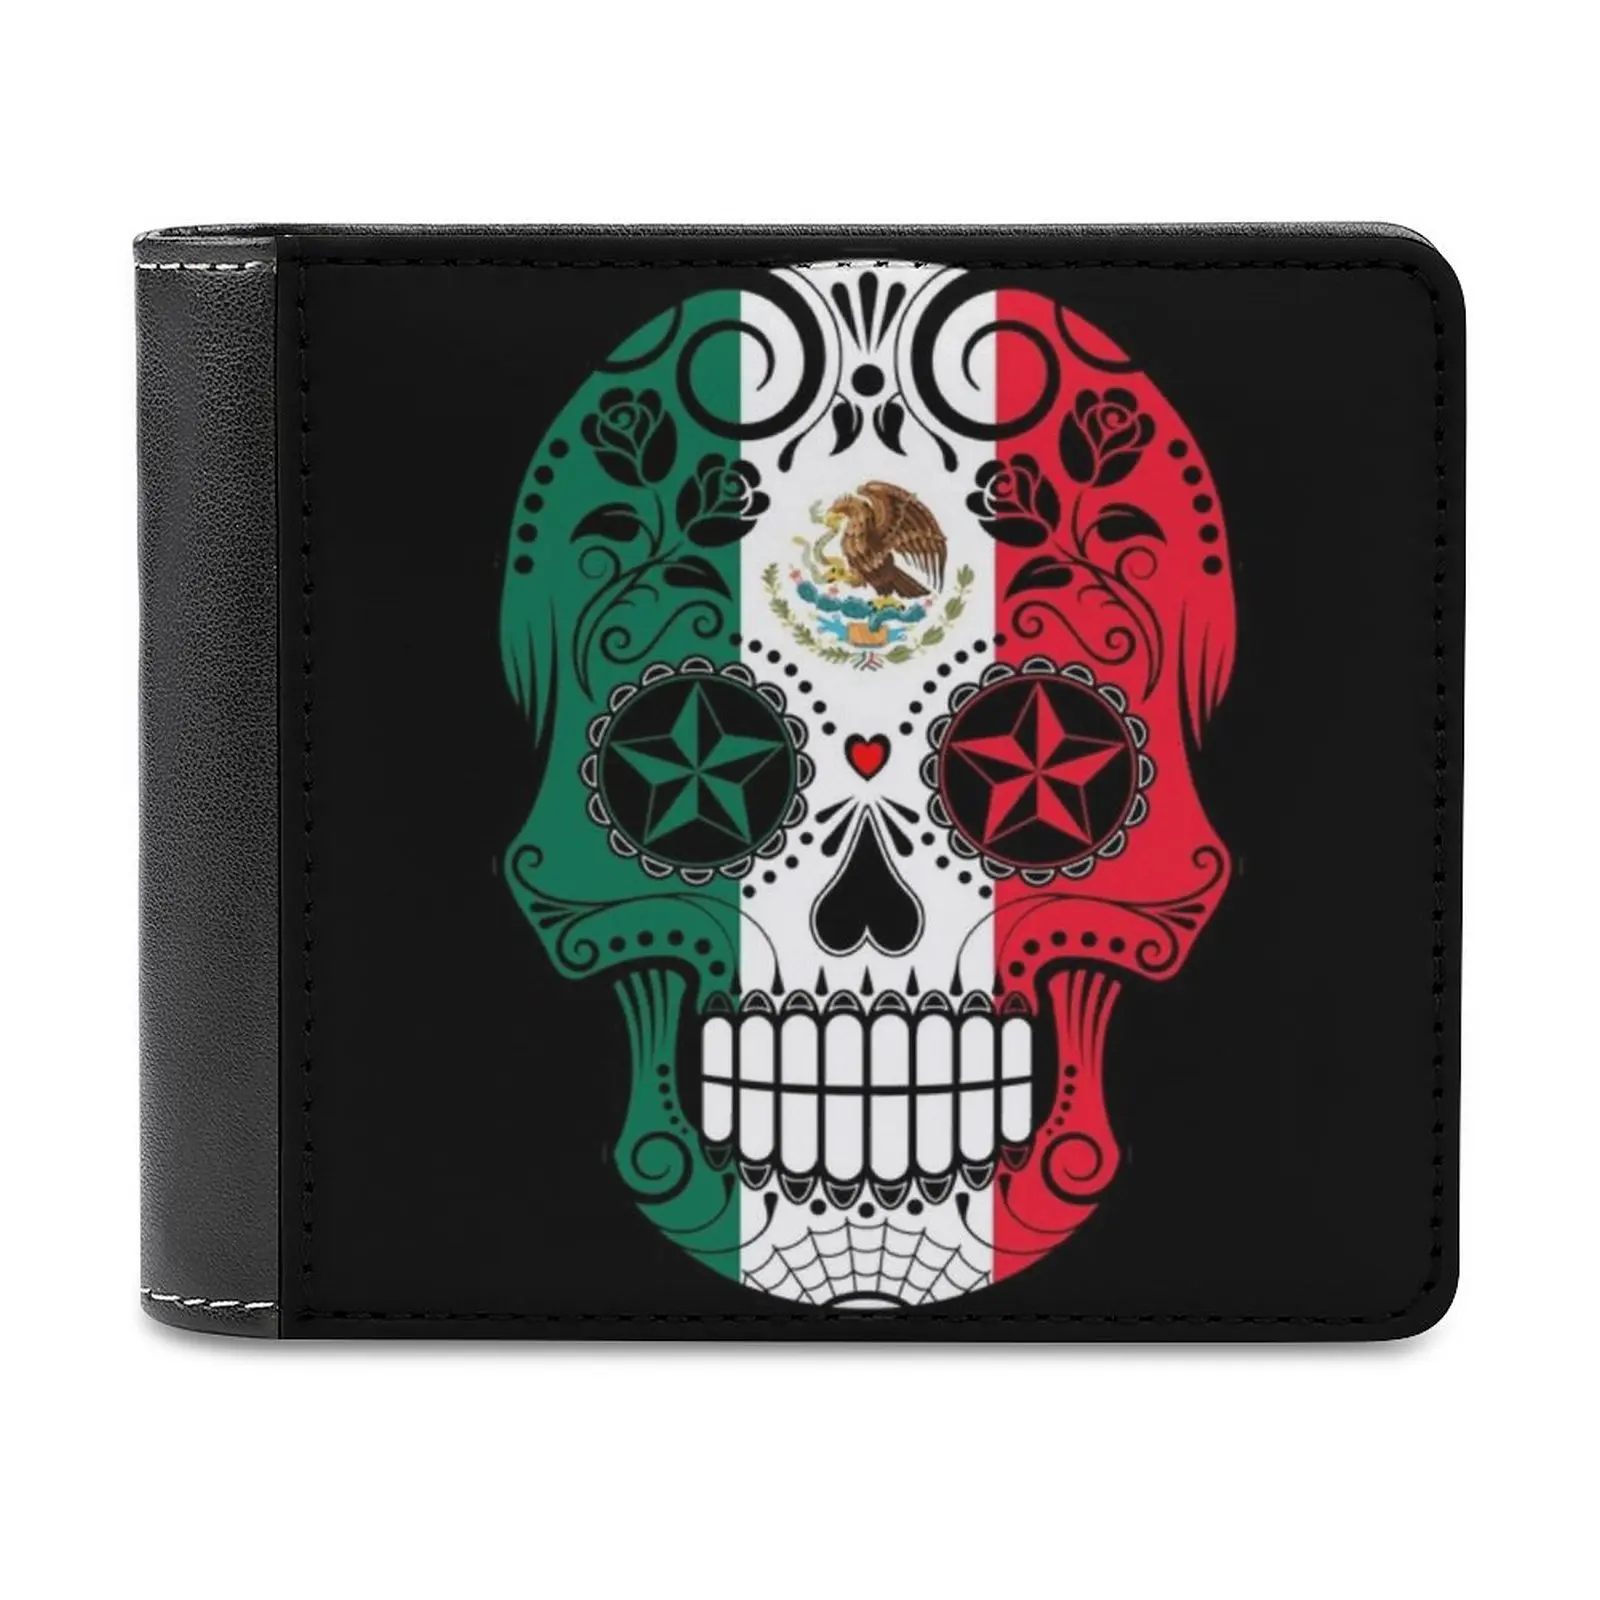 

Sugar Skull With Roses And Flag Of Mexico Leather Wallet Men's Wallet Purse Money Clips Sugar Skull Skull Day Of The Dead